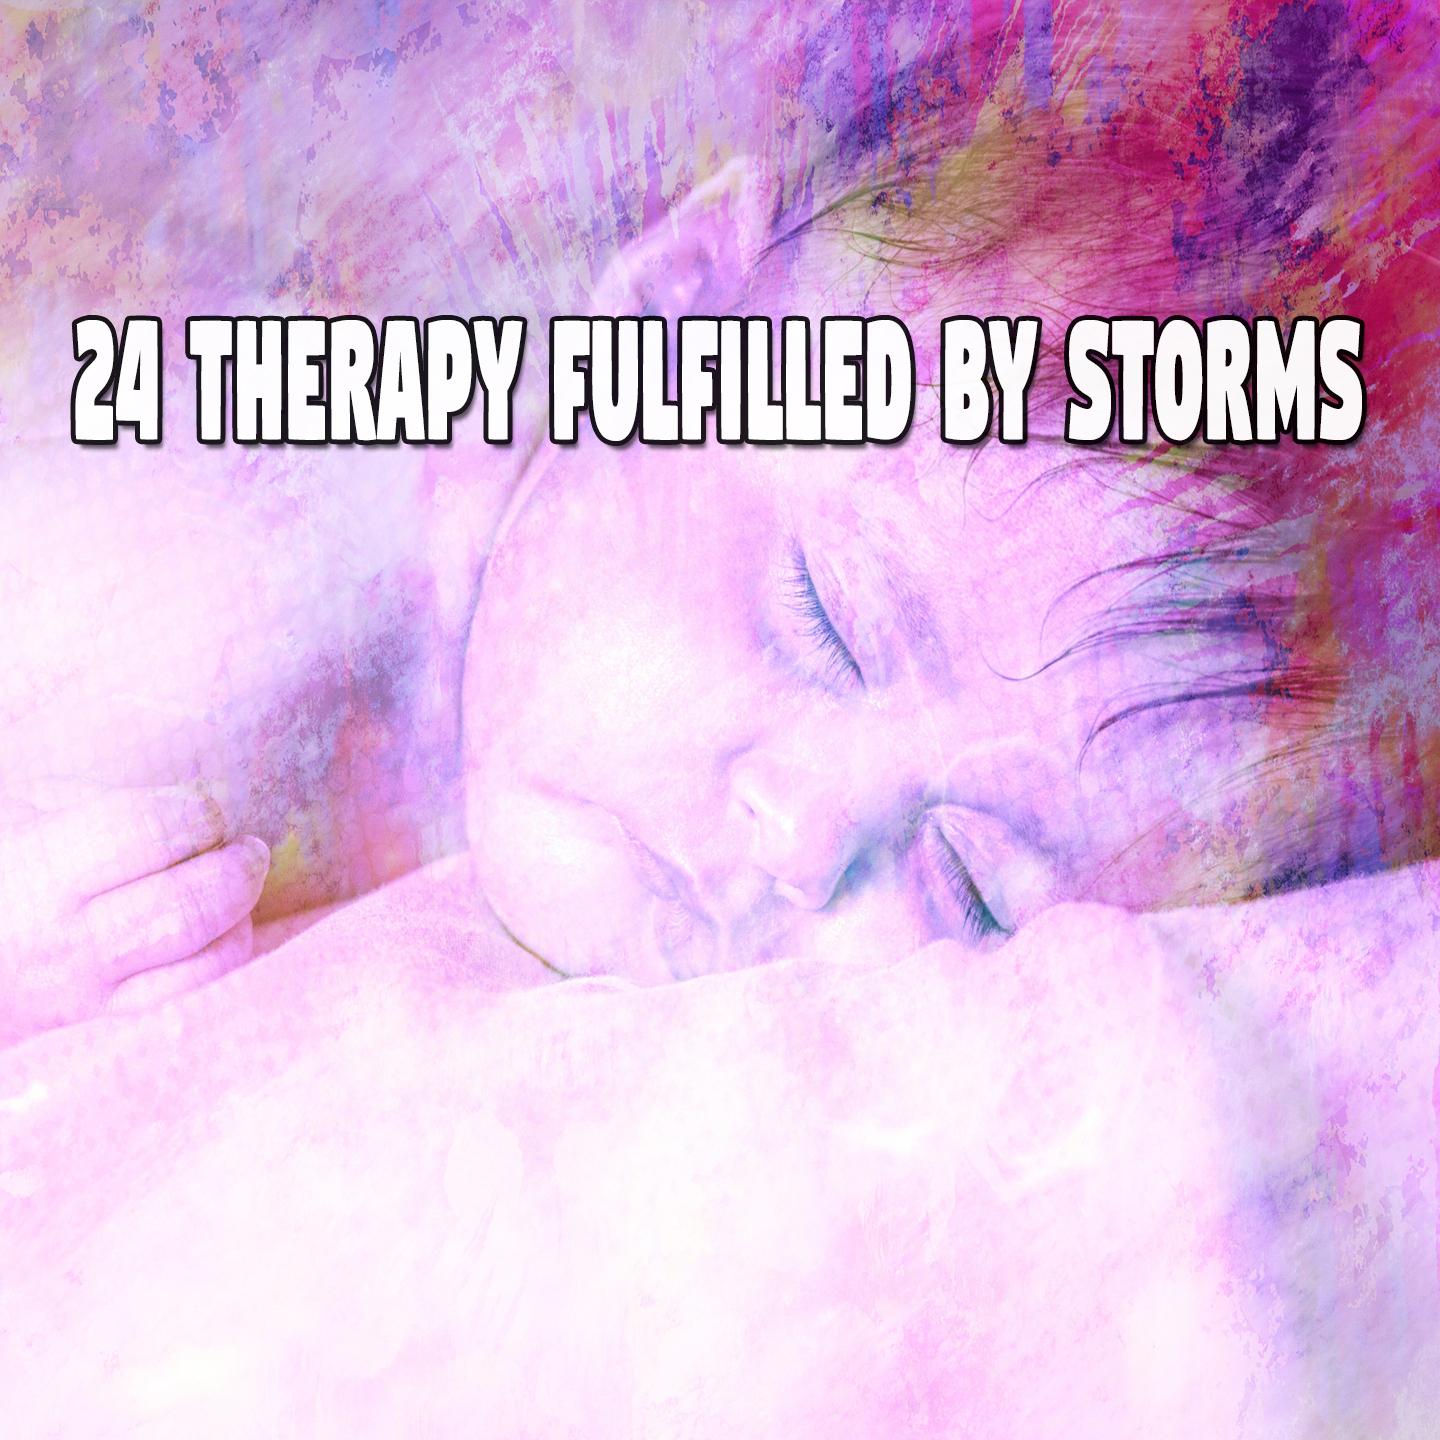 24 Therapy Fulfilled by Storms